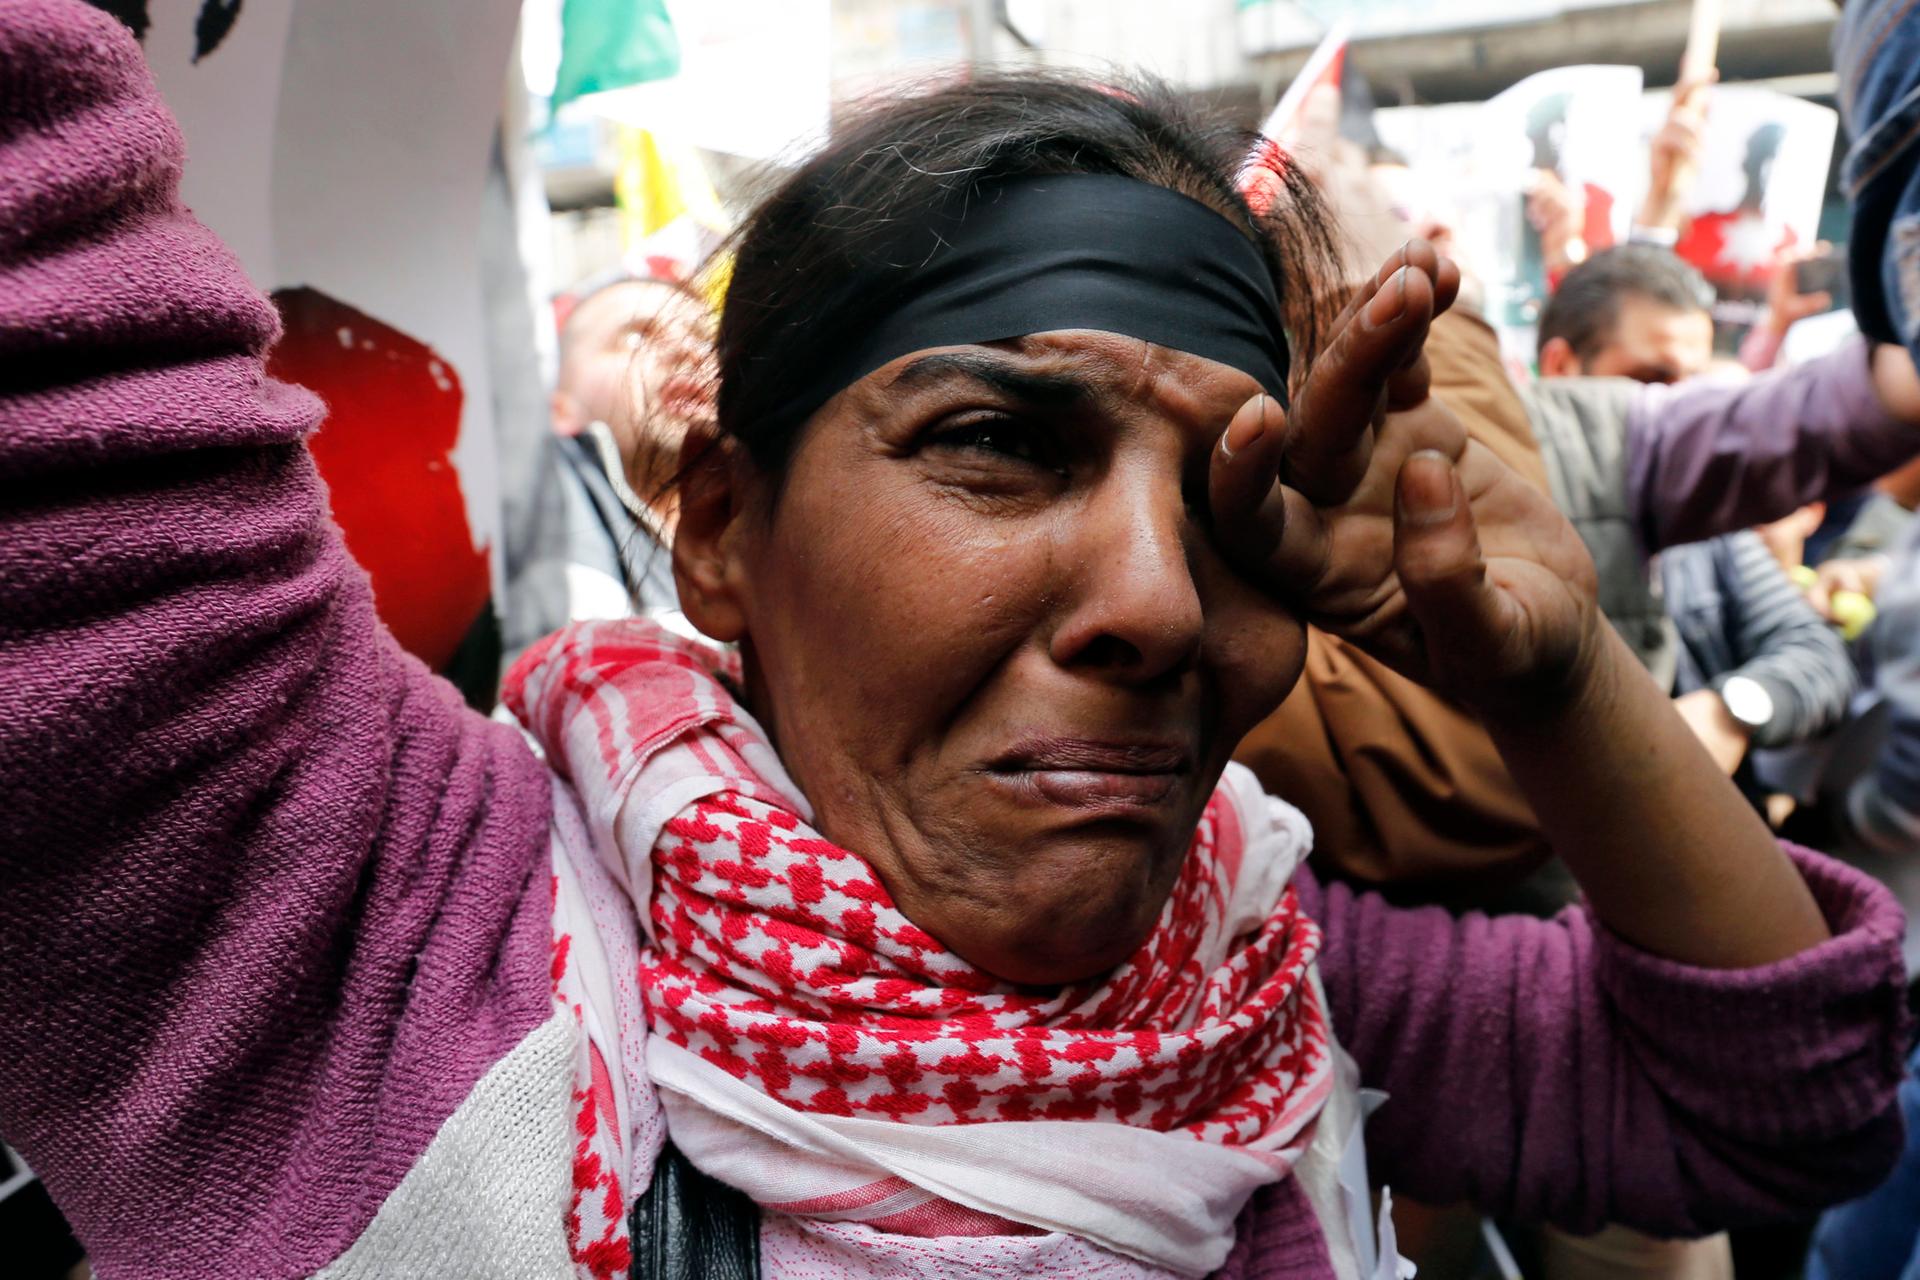 A Jordanian protester cries during a march after Friday prayers in downtown Amman February 6, 2015.